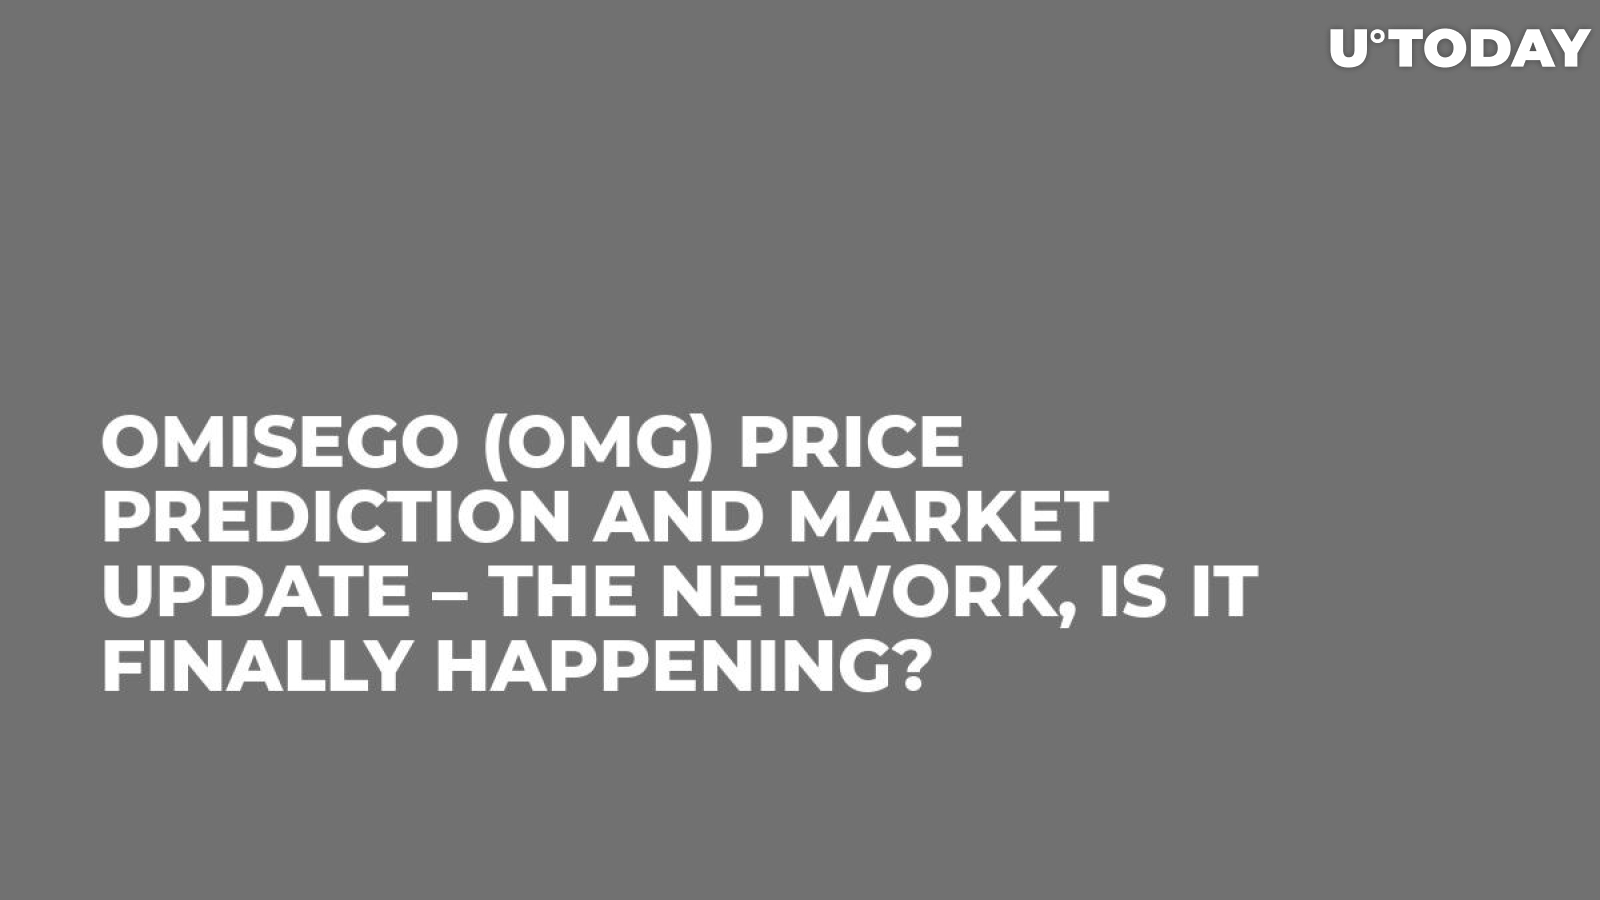 Omisego (OMG) Price Prediction and Market Update – The Network, Is It Finally Happening?